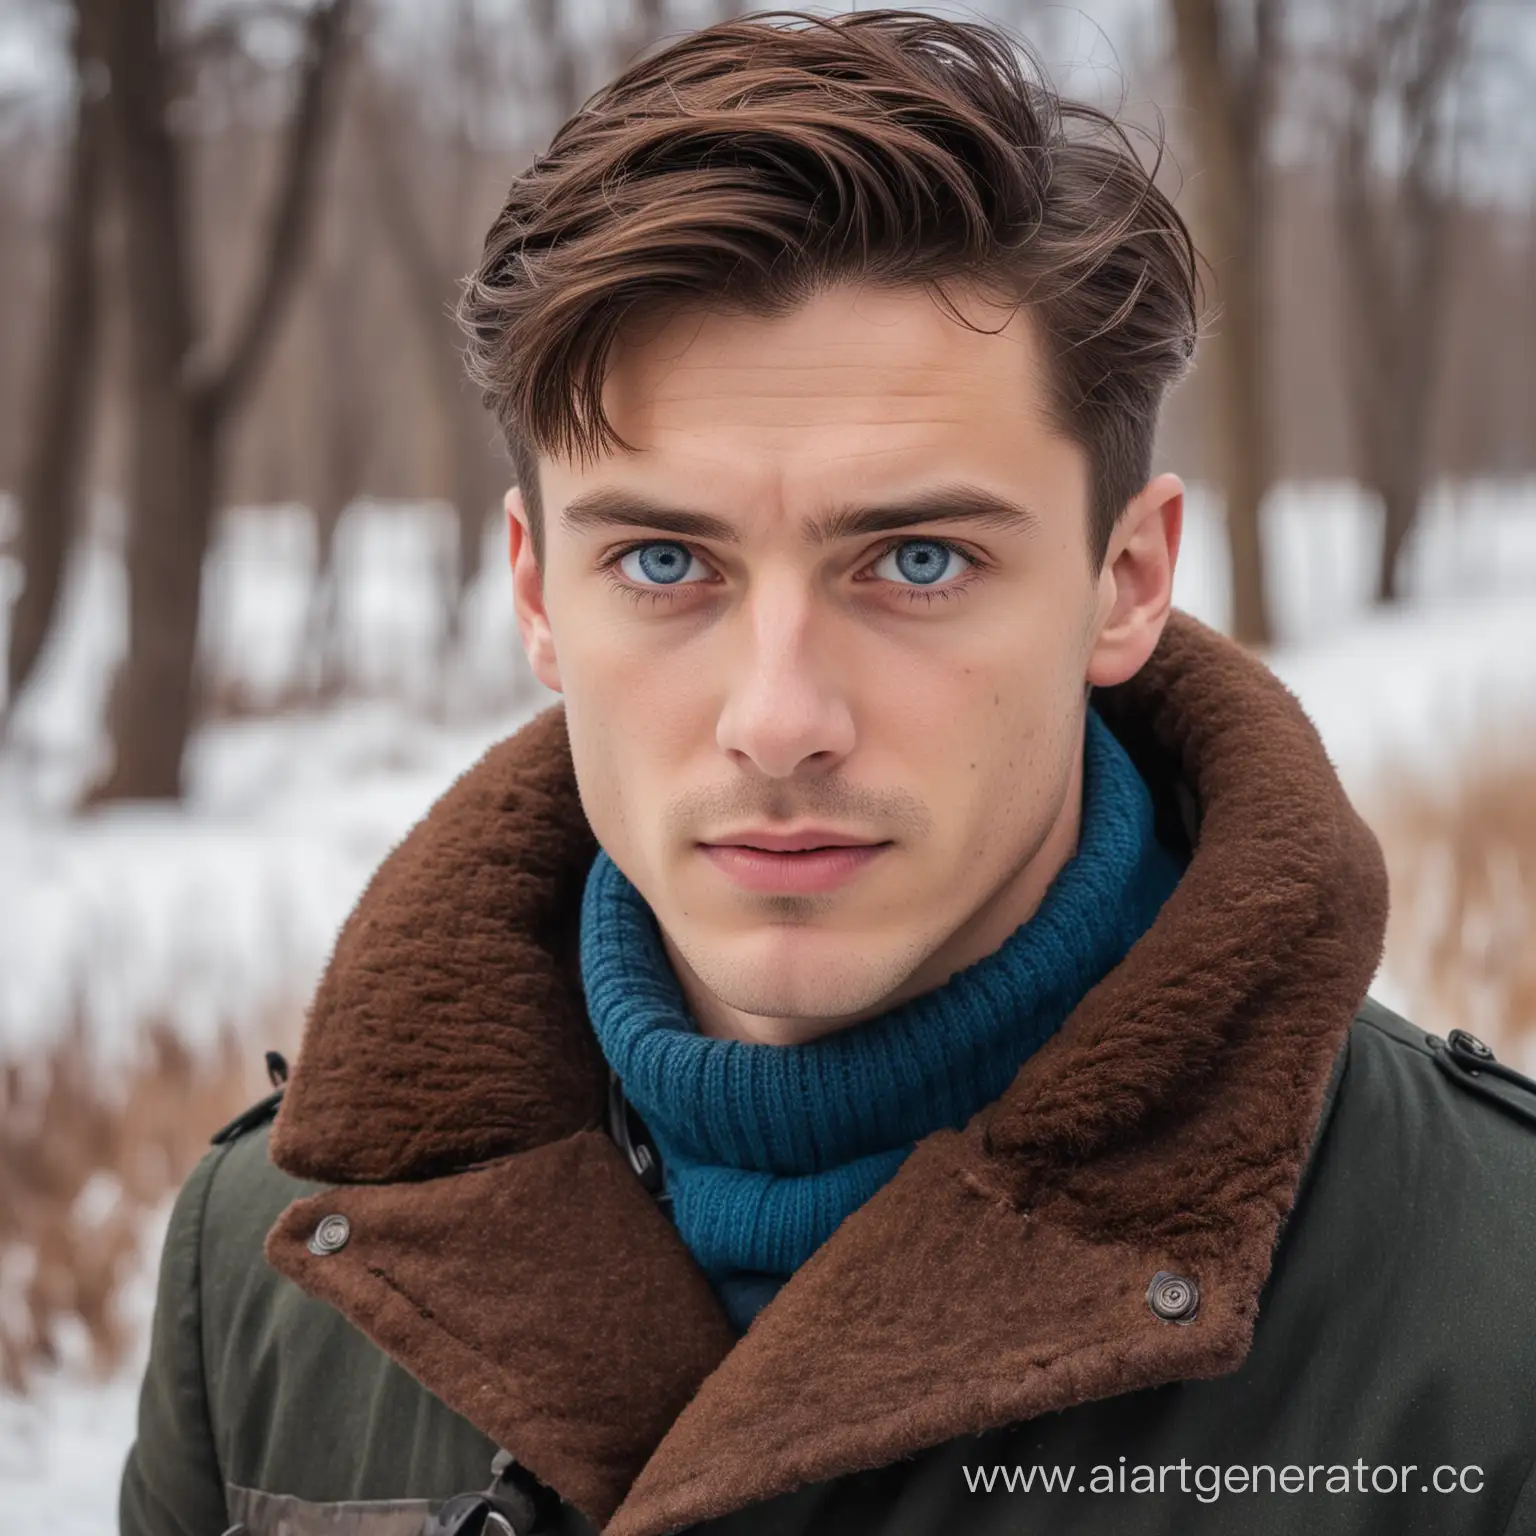 BlueEyed-OberLieutenant-Braving-Winter-Winds-with-Discontent